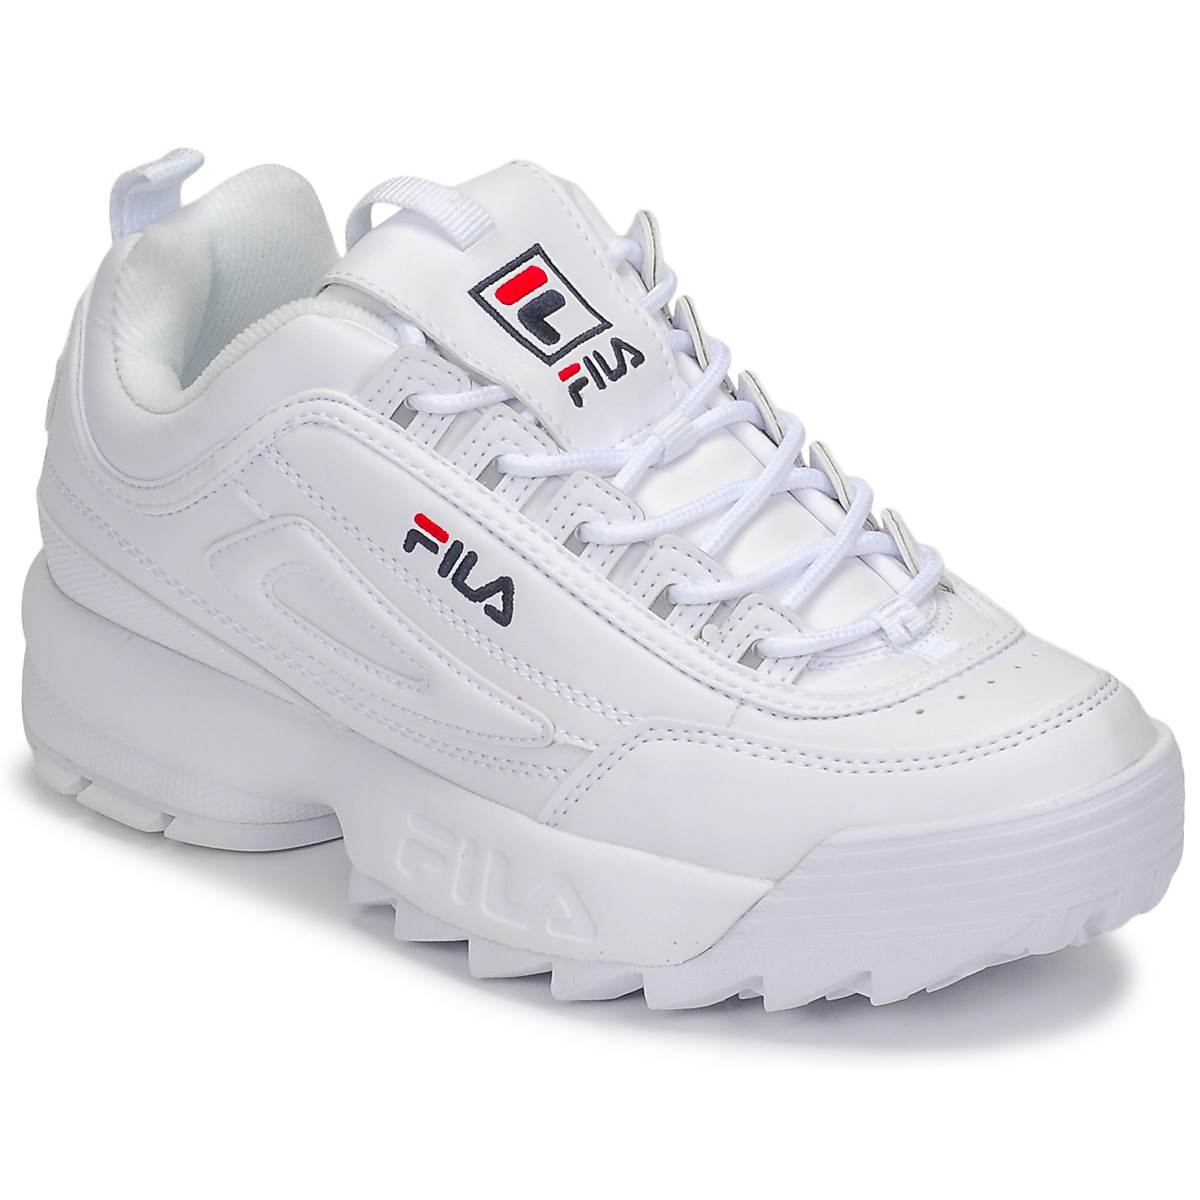 Fila DISRUPTOR LOW WMN White - delivery | Spartoo NET Shoes Low top trainers Women USD/$109.00